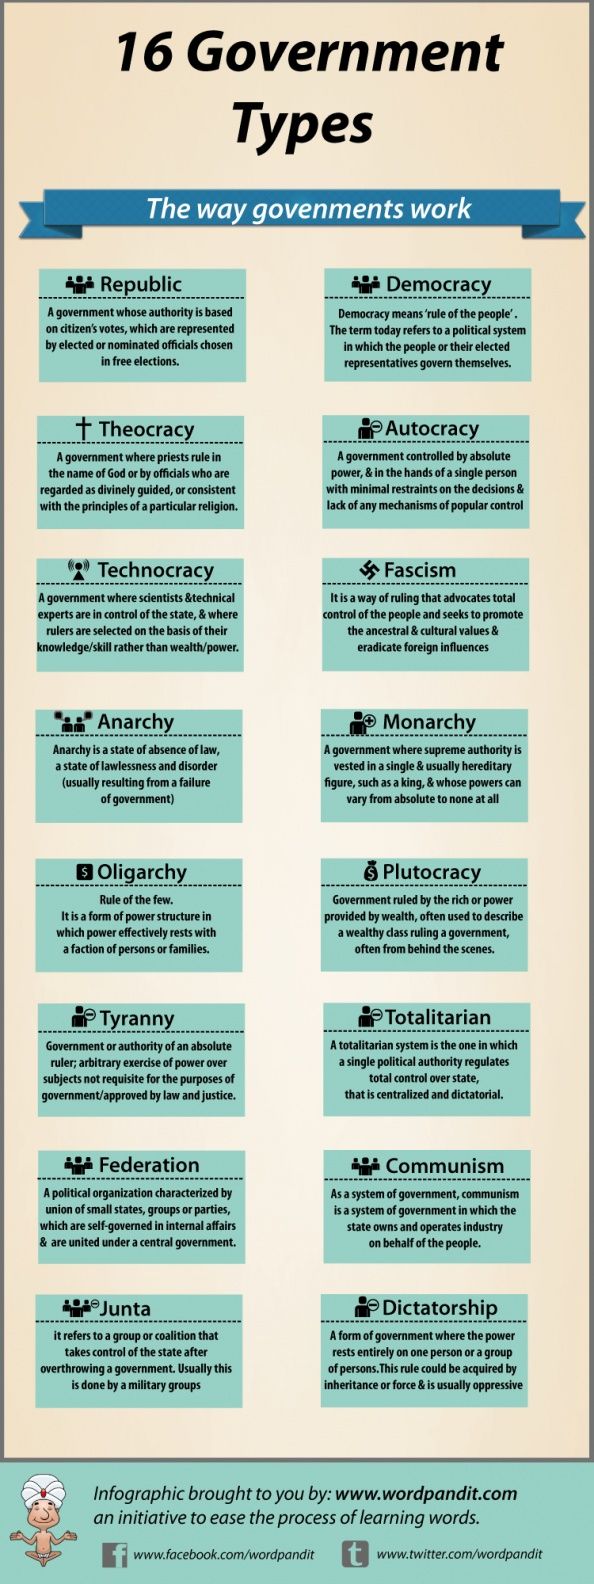 16 Government Types